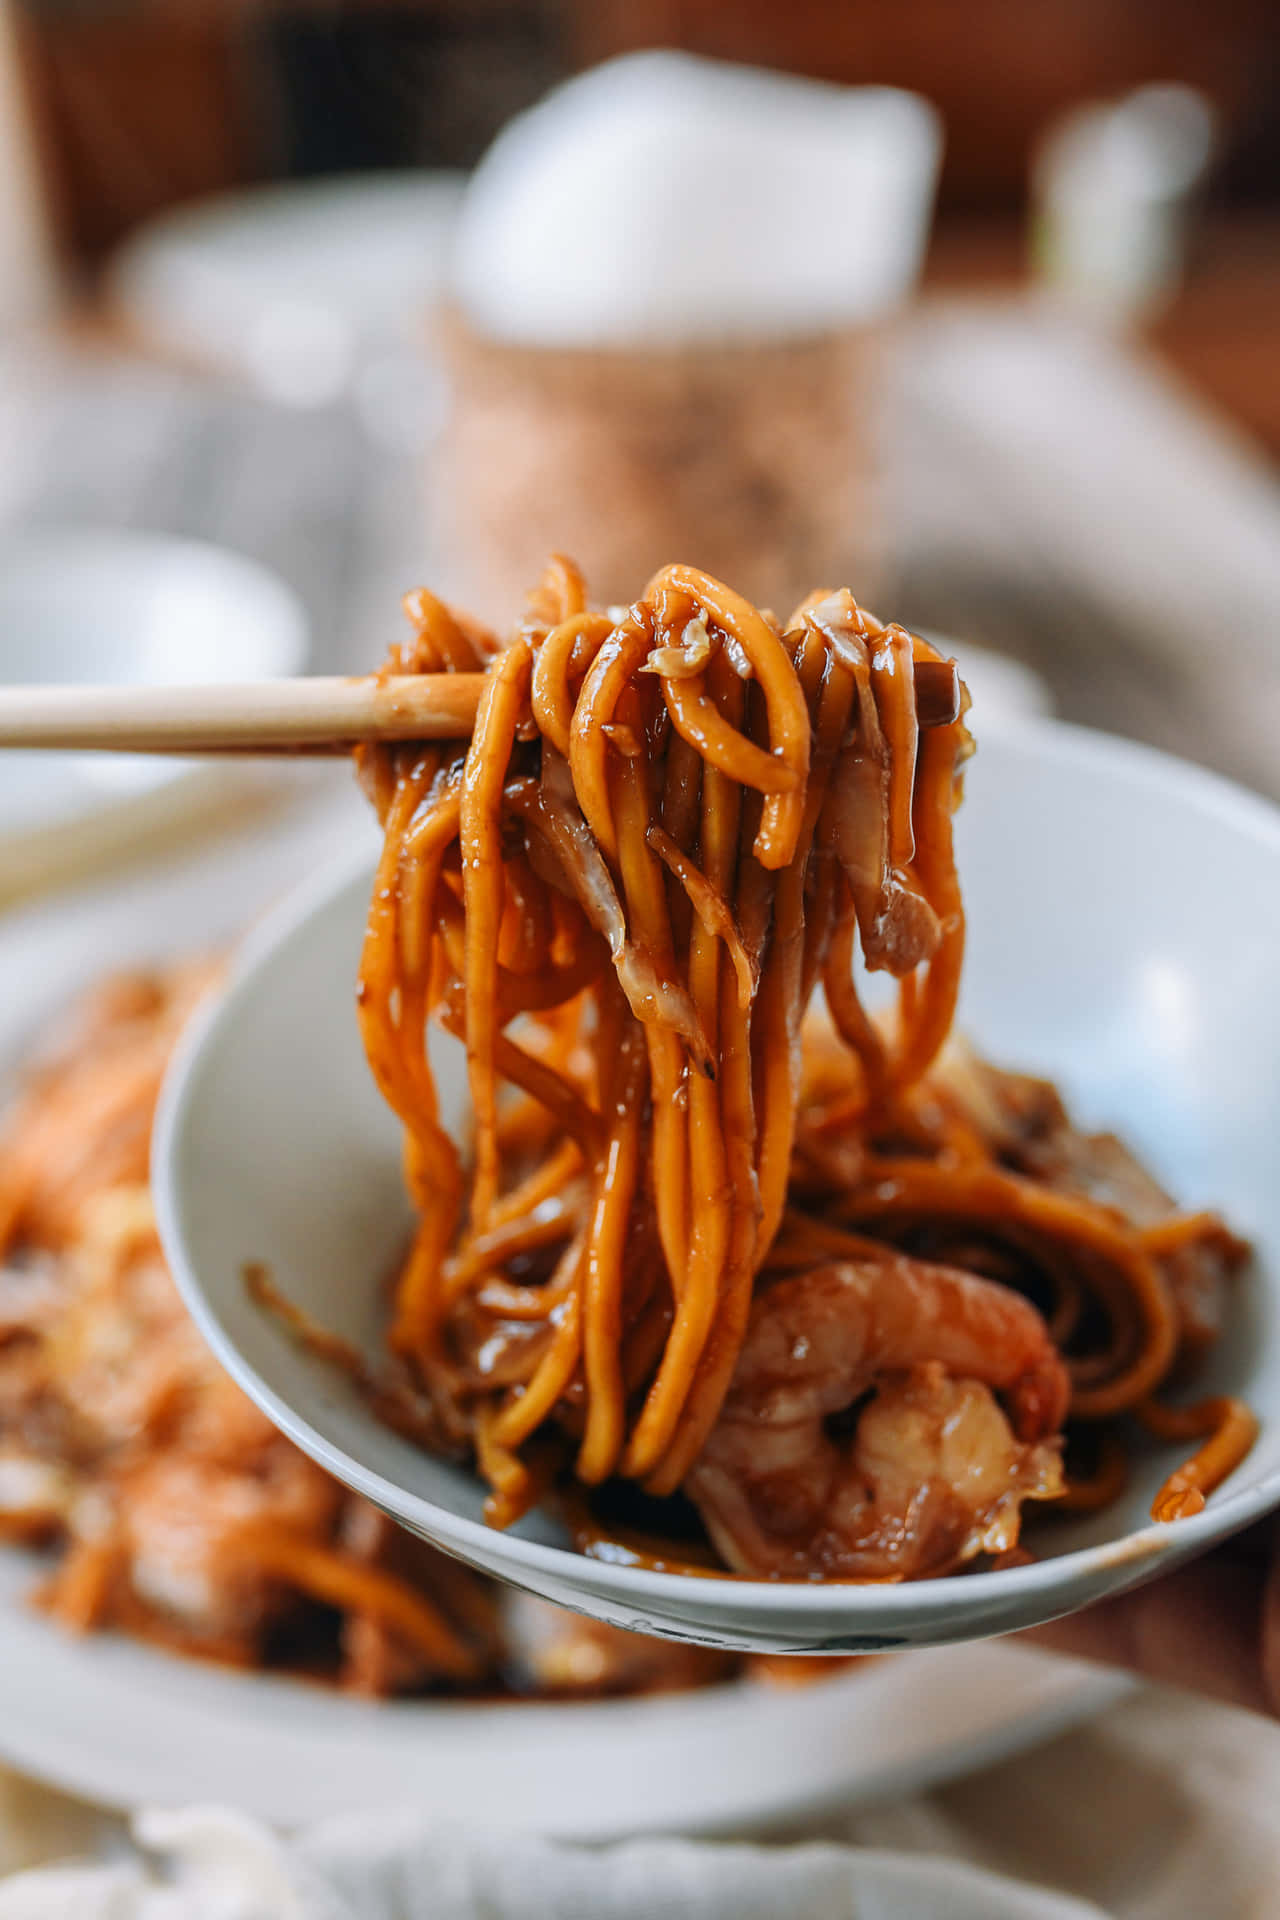 Hokkien Mee Placed On Small Bowl Wallpaper